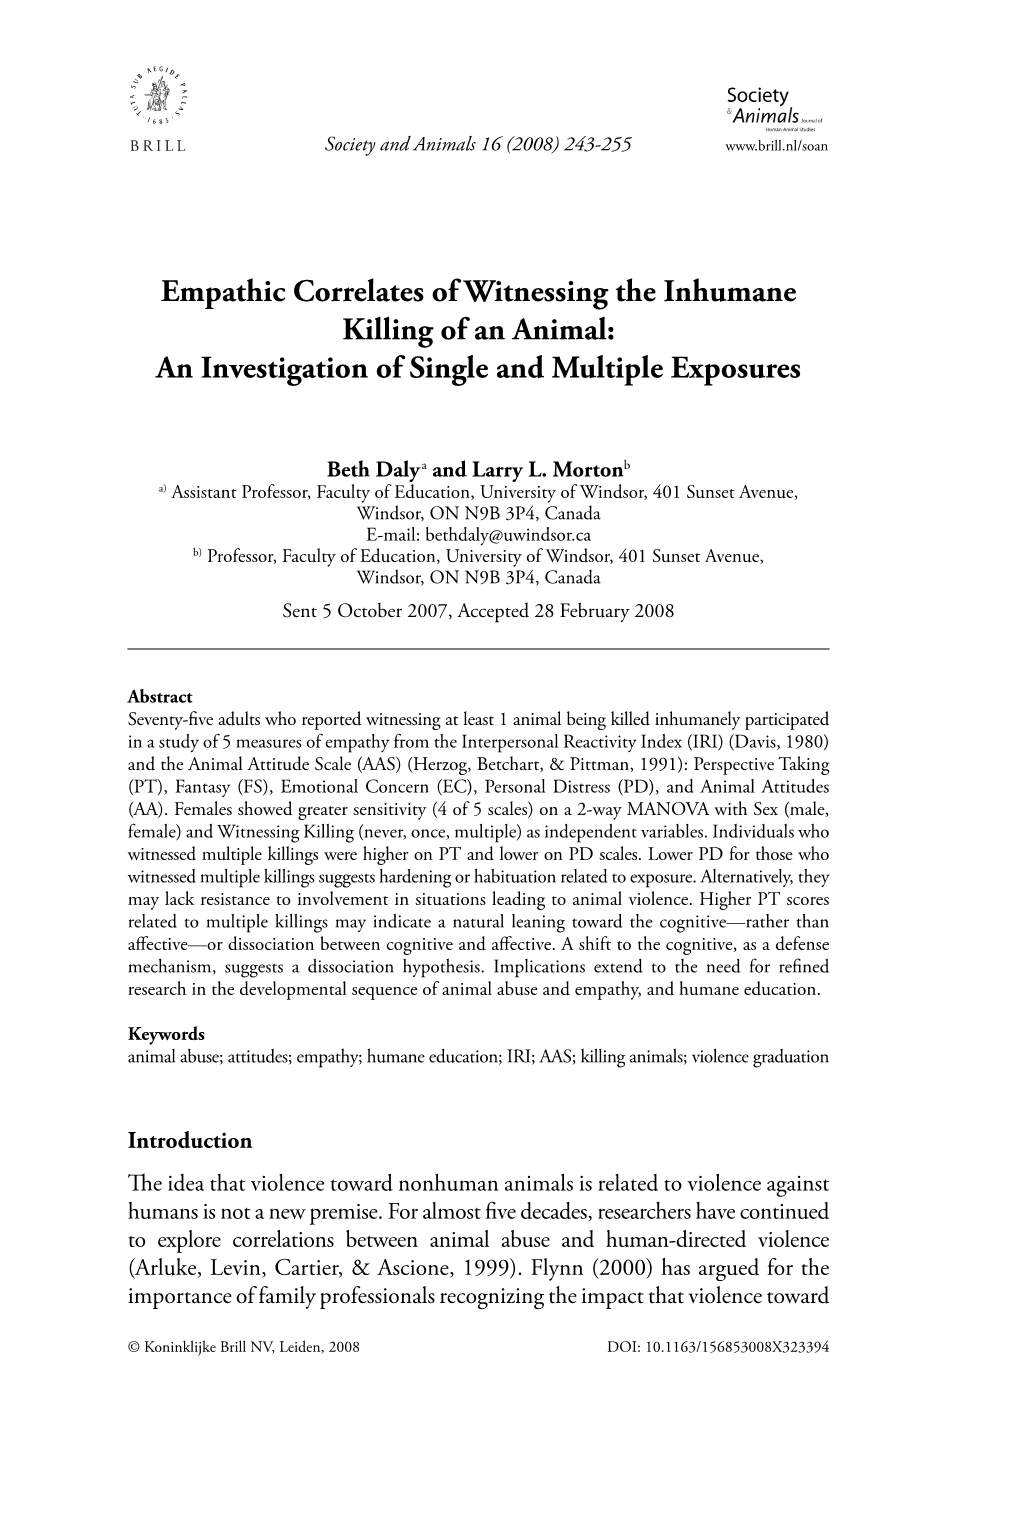 Empathic Correlates of Witnessing the Inhumane Killing of an Animal: an Investigation of Single and Multiple Exposures